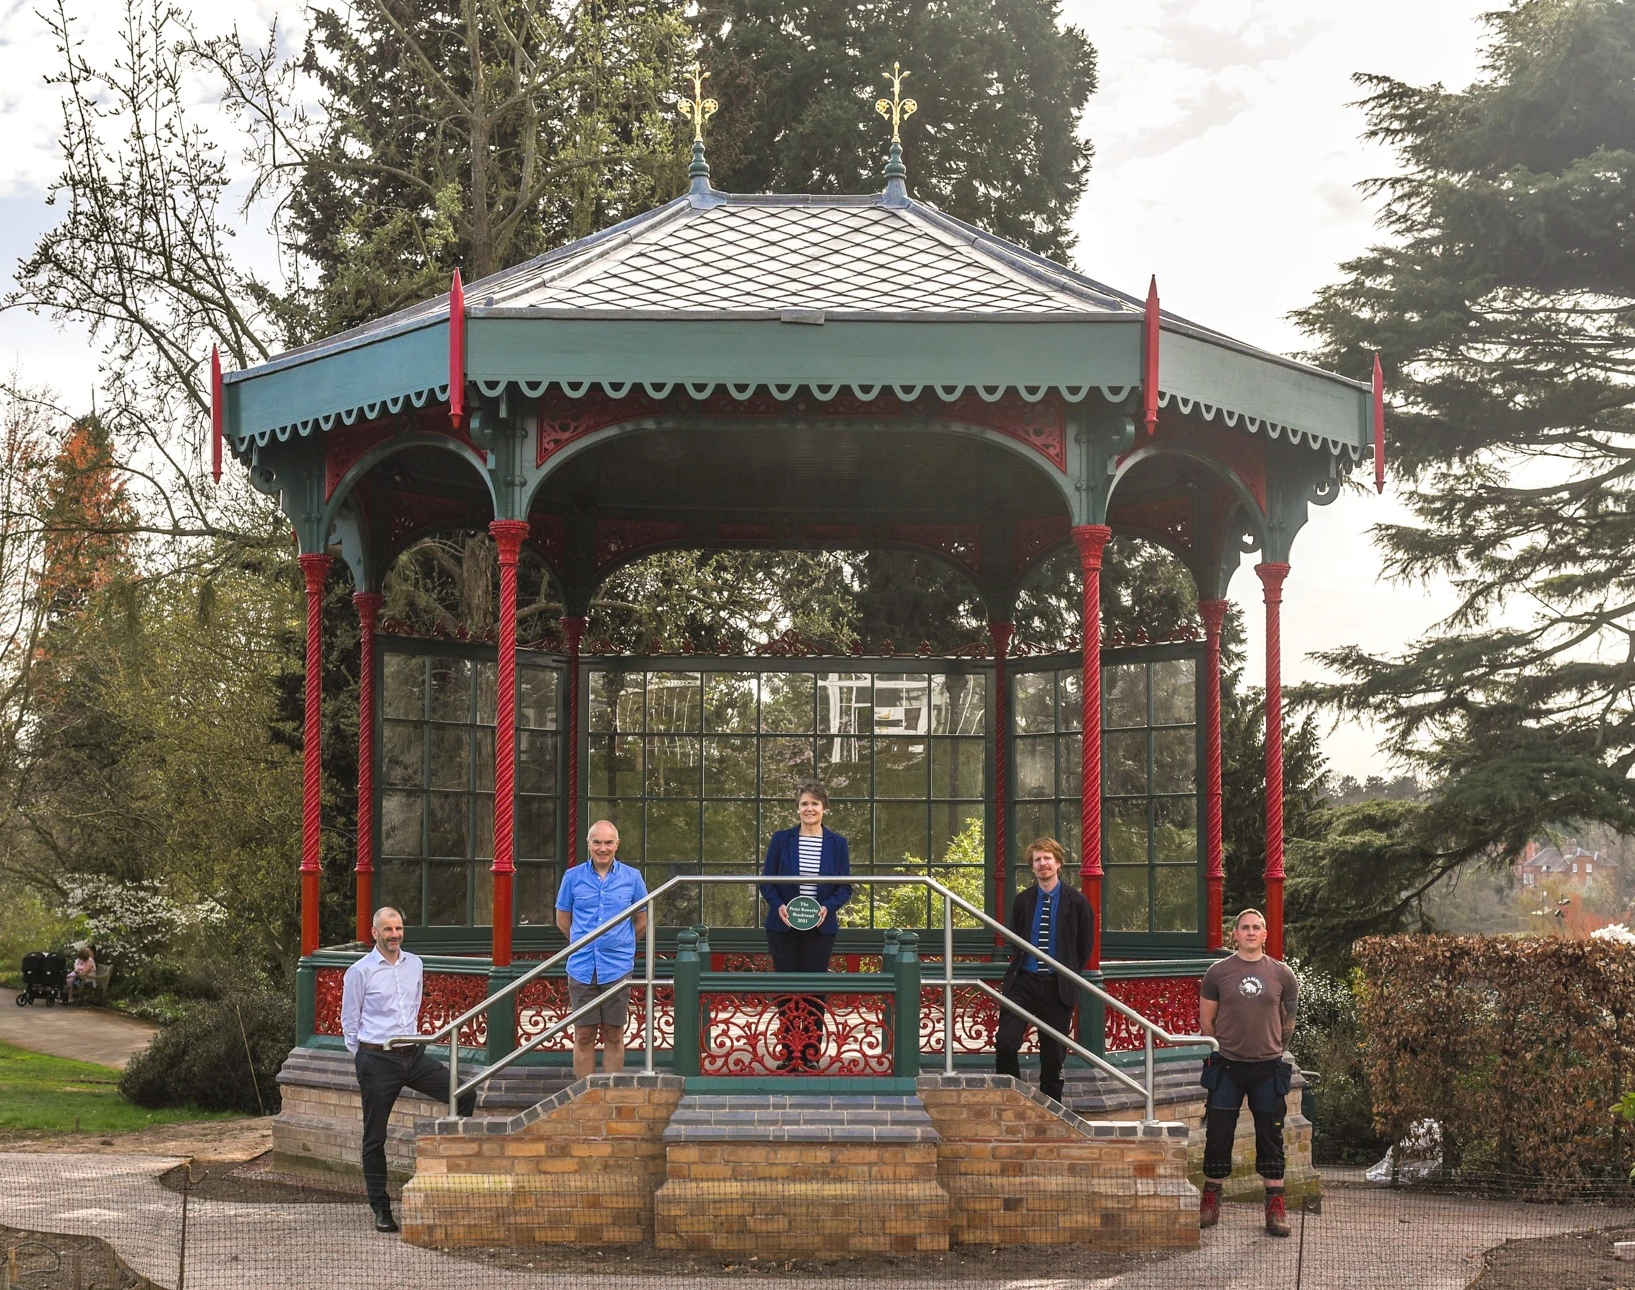 The new bandstand is unveiled at the Birmingham Botanical Gardens